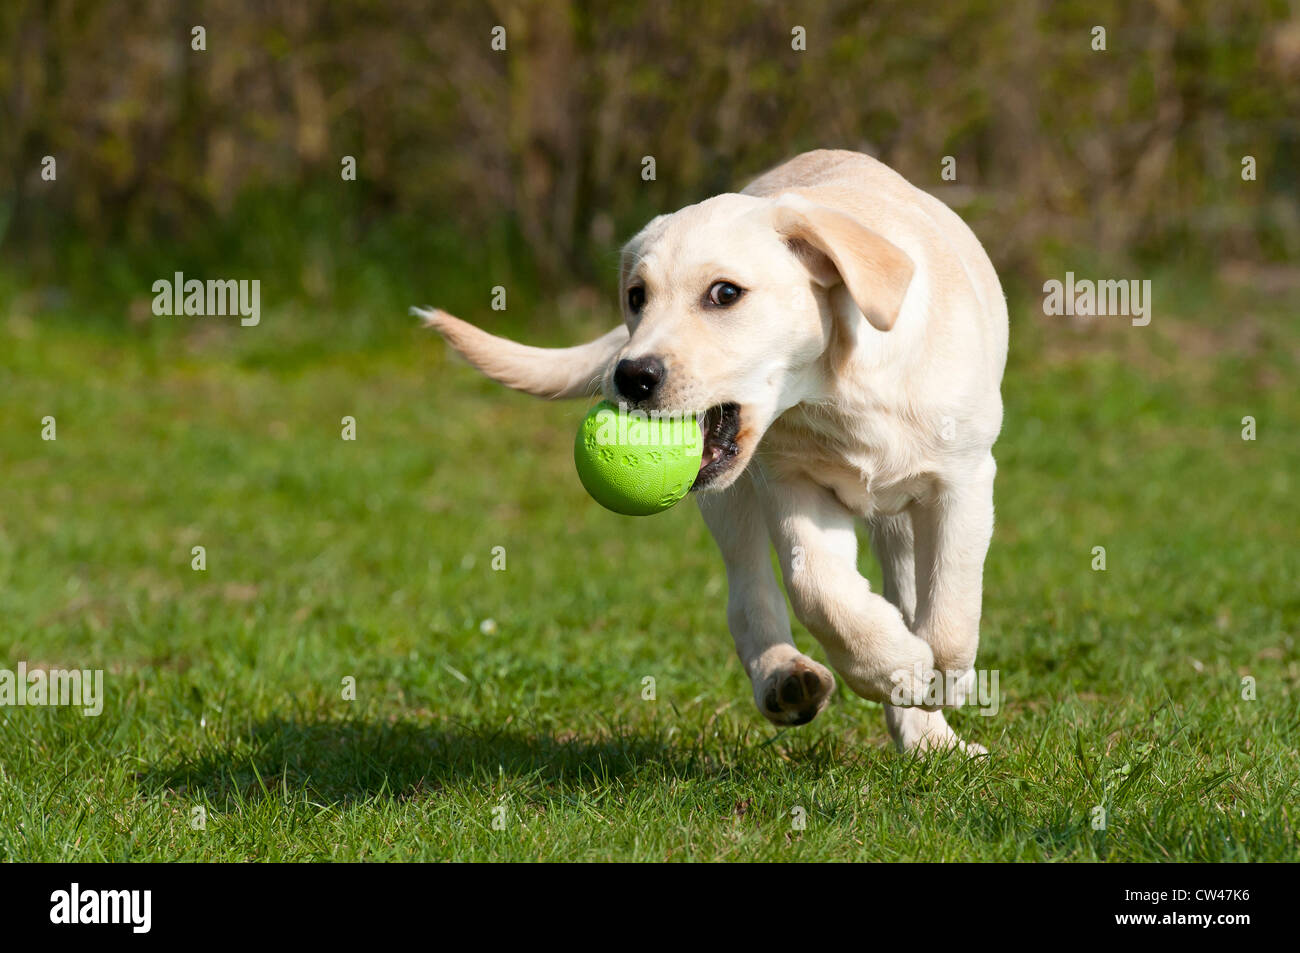 Labrador Retriever. Puppy running on a lawn while carrying a ball in its mouth Stock Photo